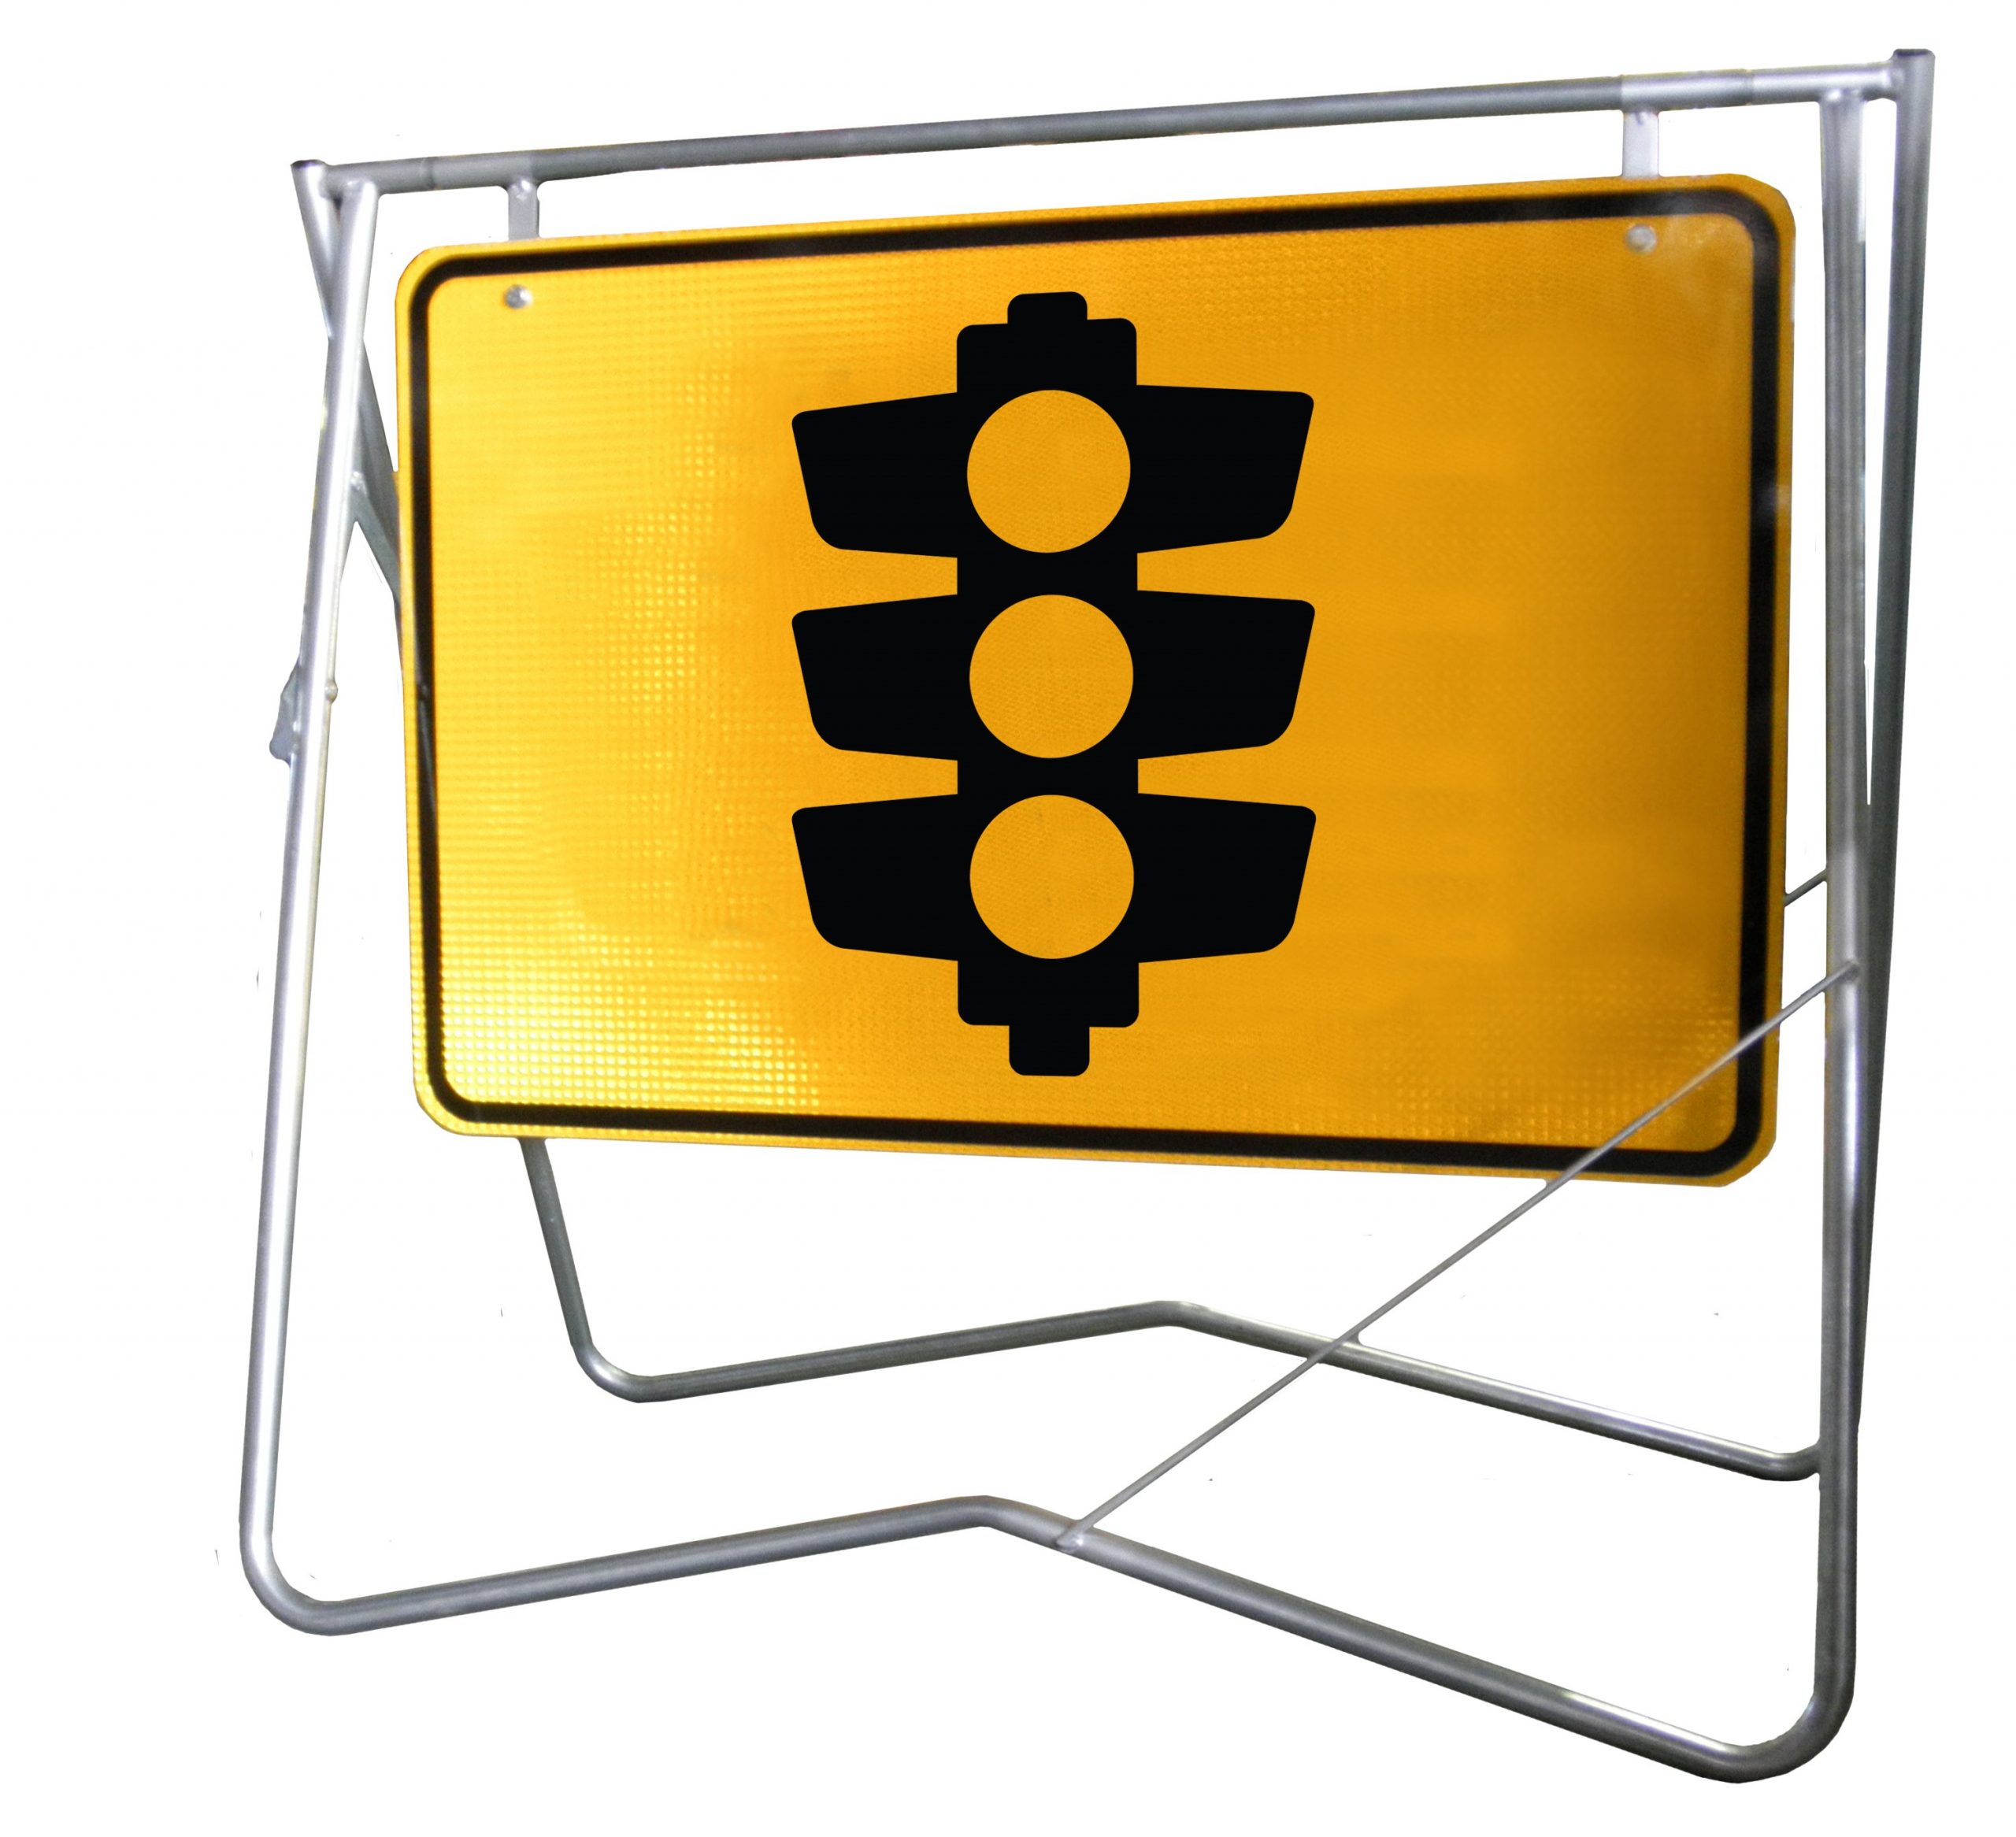 Traffic Lights - 900x600 - Mounted on swing stand